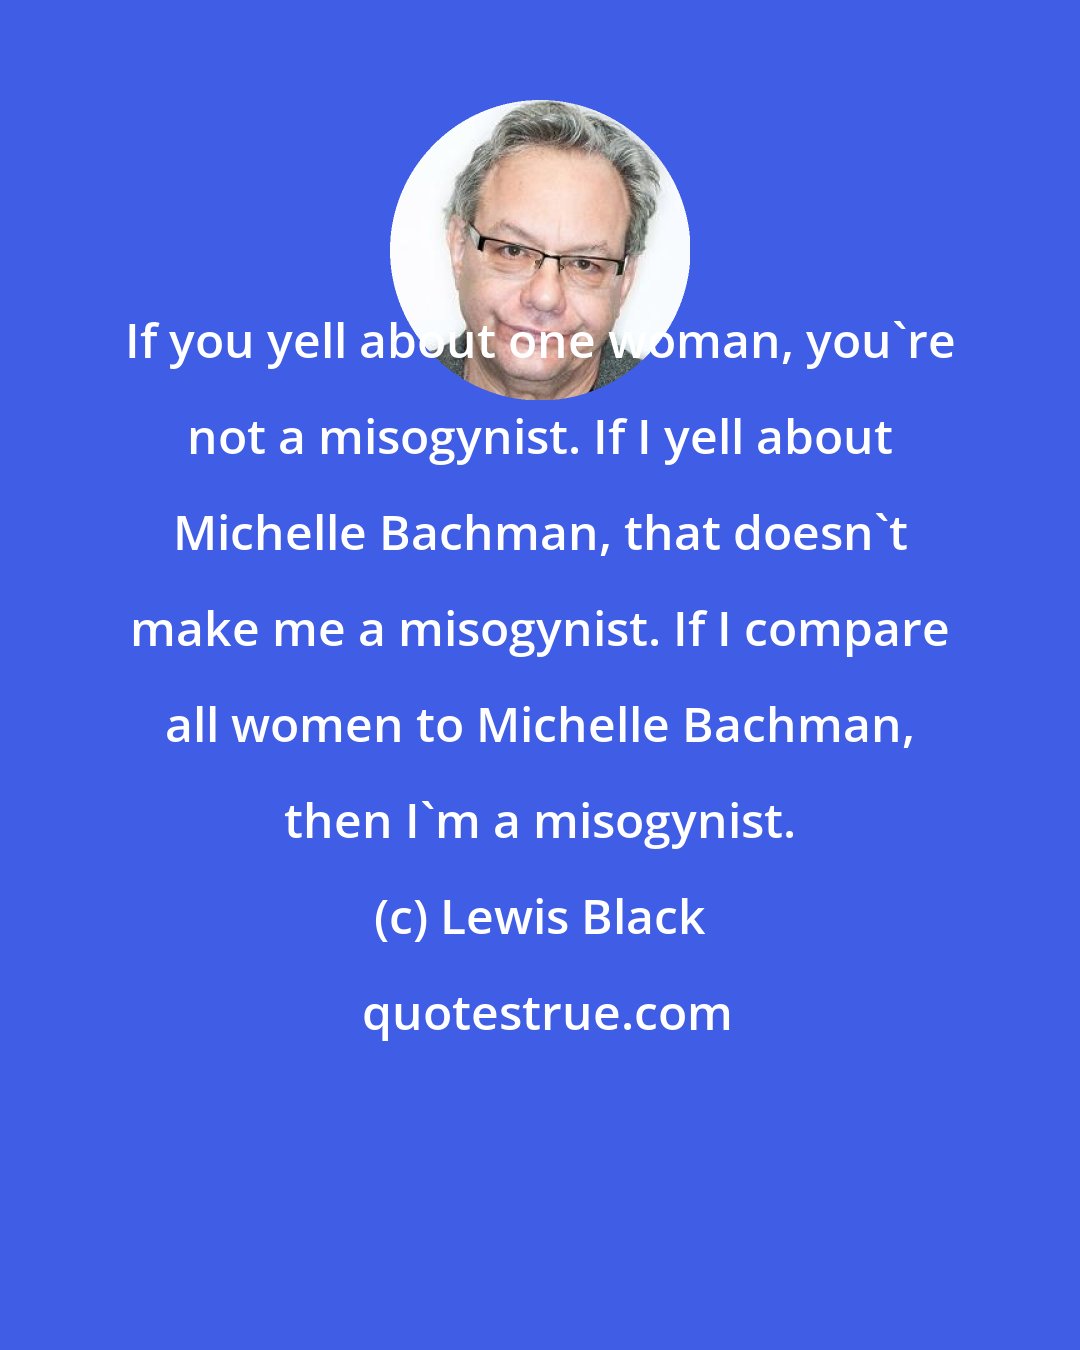 Lewis Black: If you yell about one woman, you're not a misogynist. If I yell about Michelle Bachman, that doesn't make me a misogynist. If I compare all women to Michelle Bachman, then I'm a misogynist.